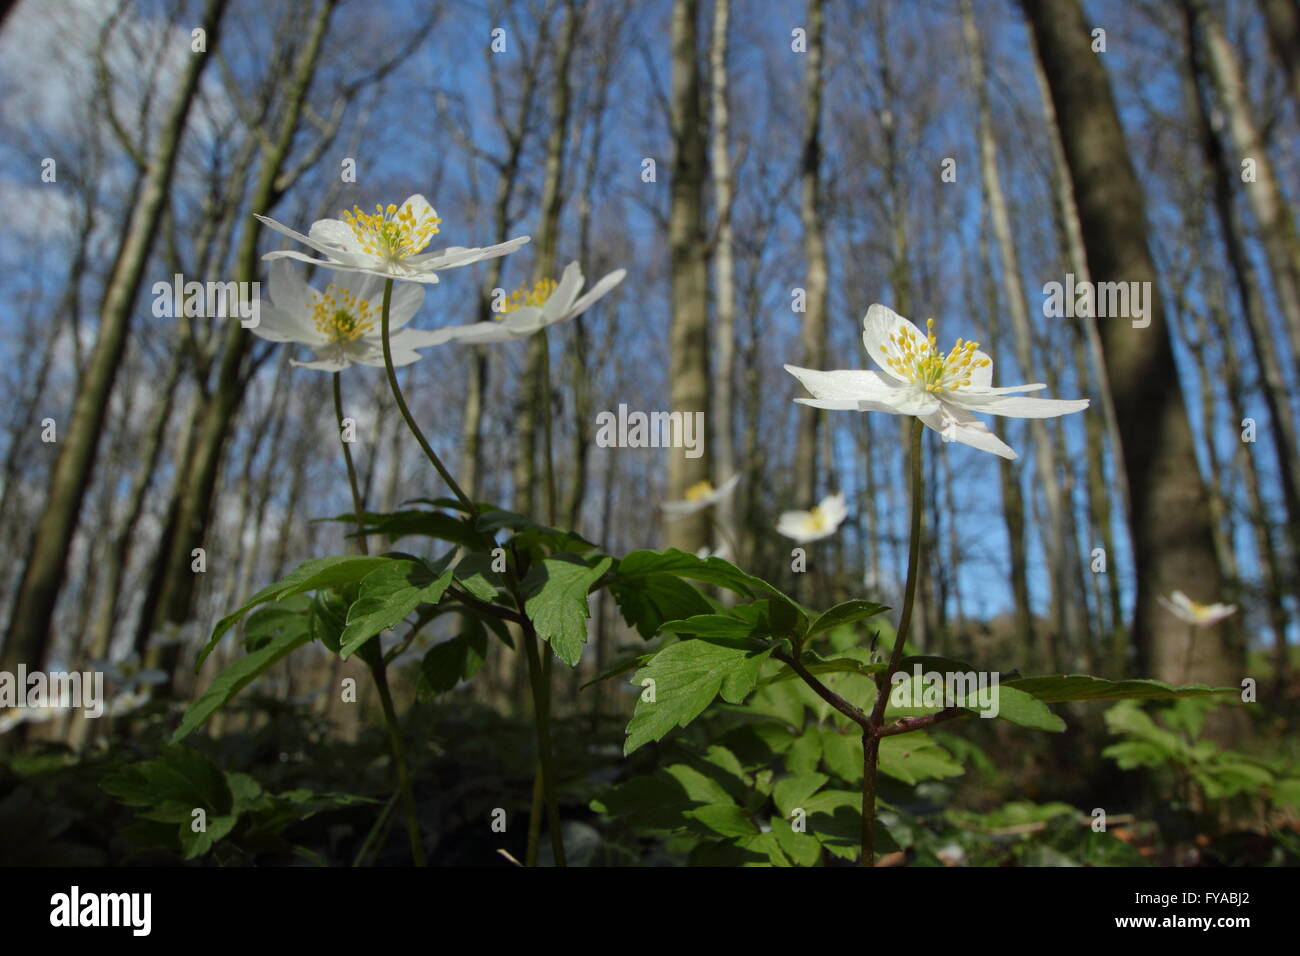 Wood anemones (anemone nemorosa) flower on the floor of an ancient Derbyshire woodland on a sunny spring day, England UK - April Stock Photo